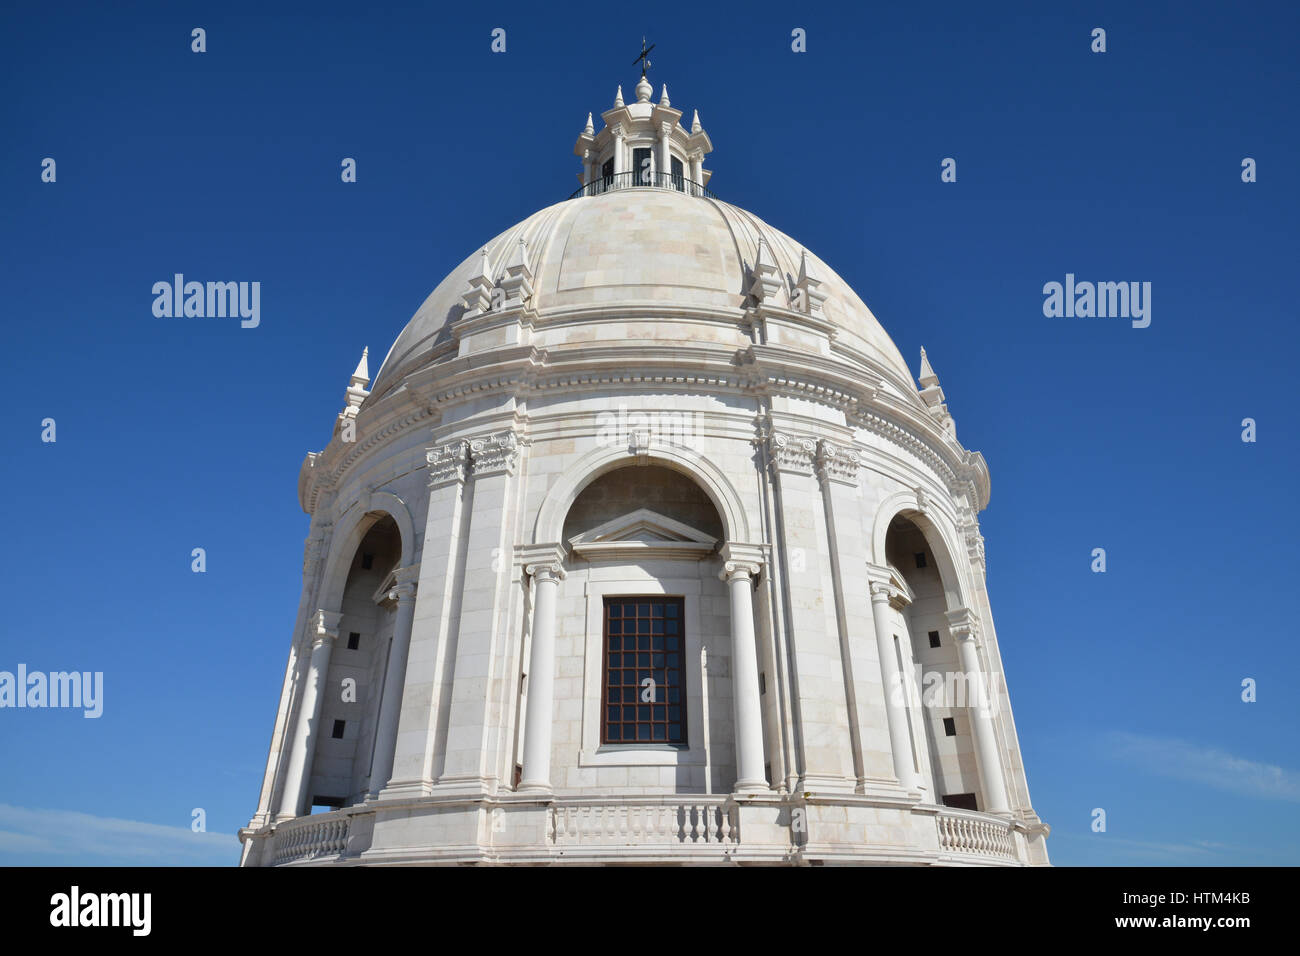 National Pantheon of Portugal beautiful white marble dome in Lisbon against blue sky (Church of Santa Engracia) Stock Photo